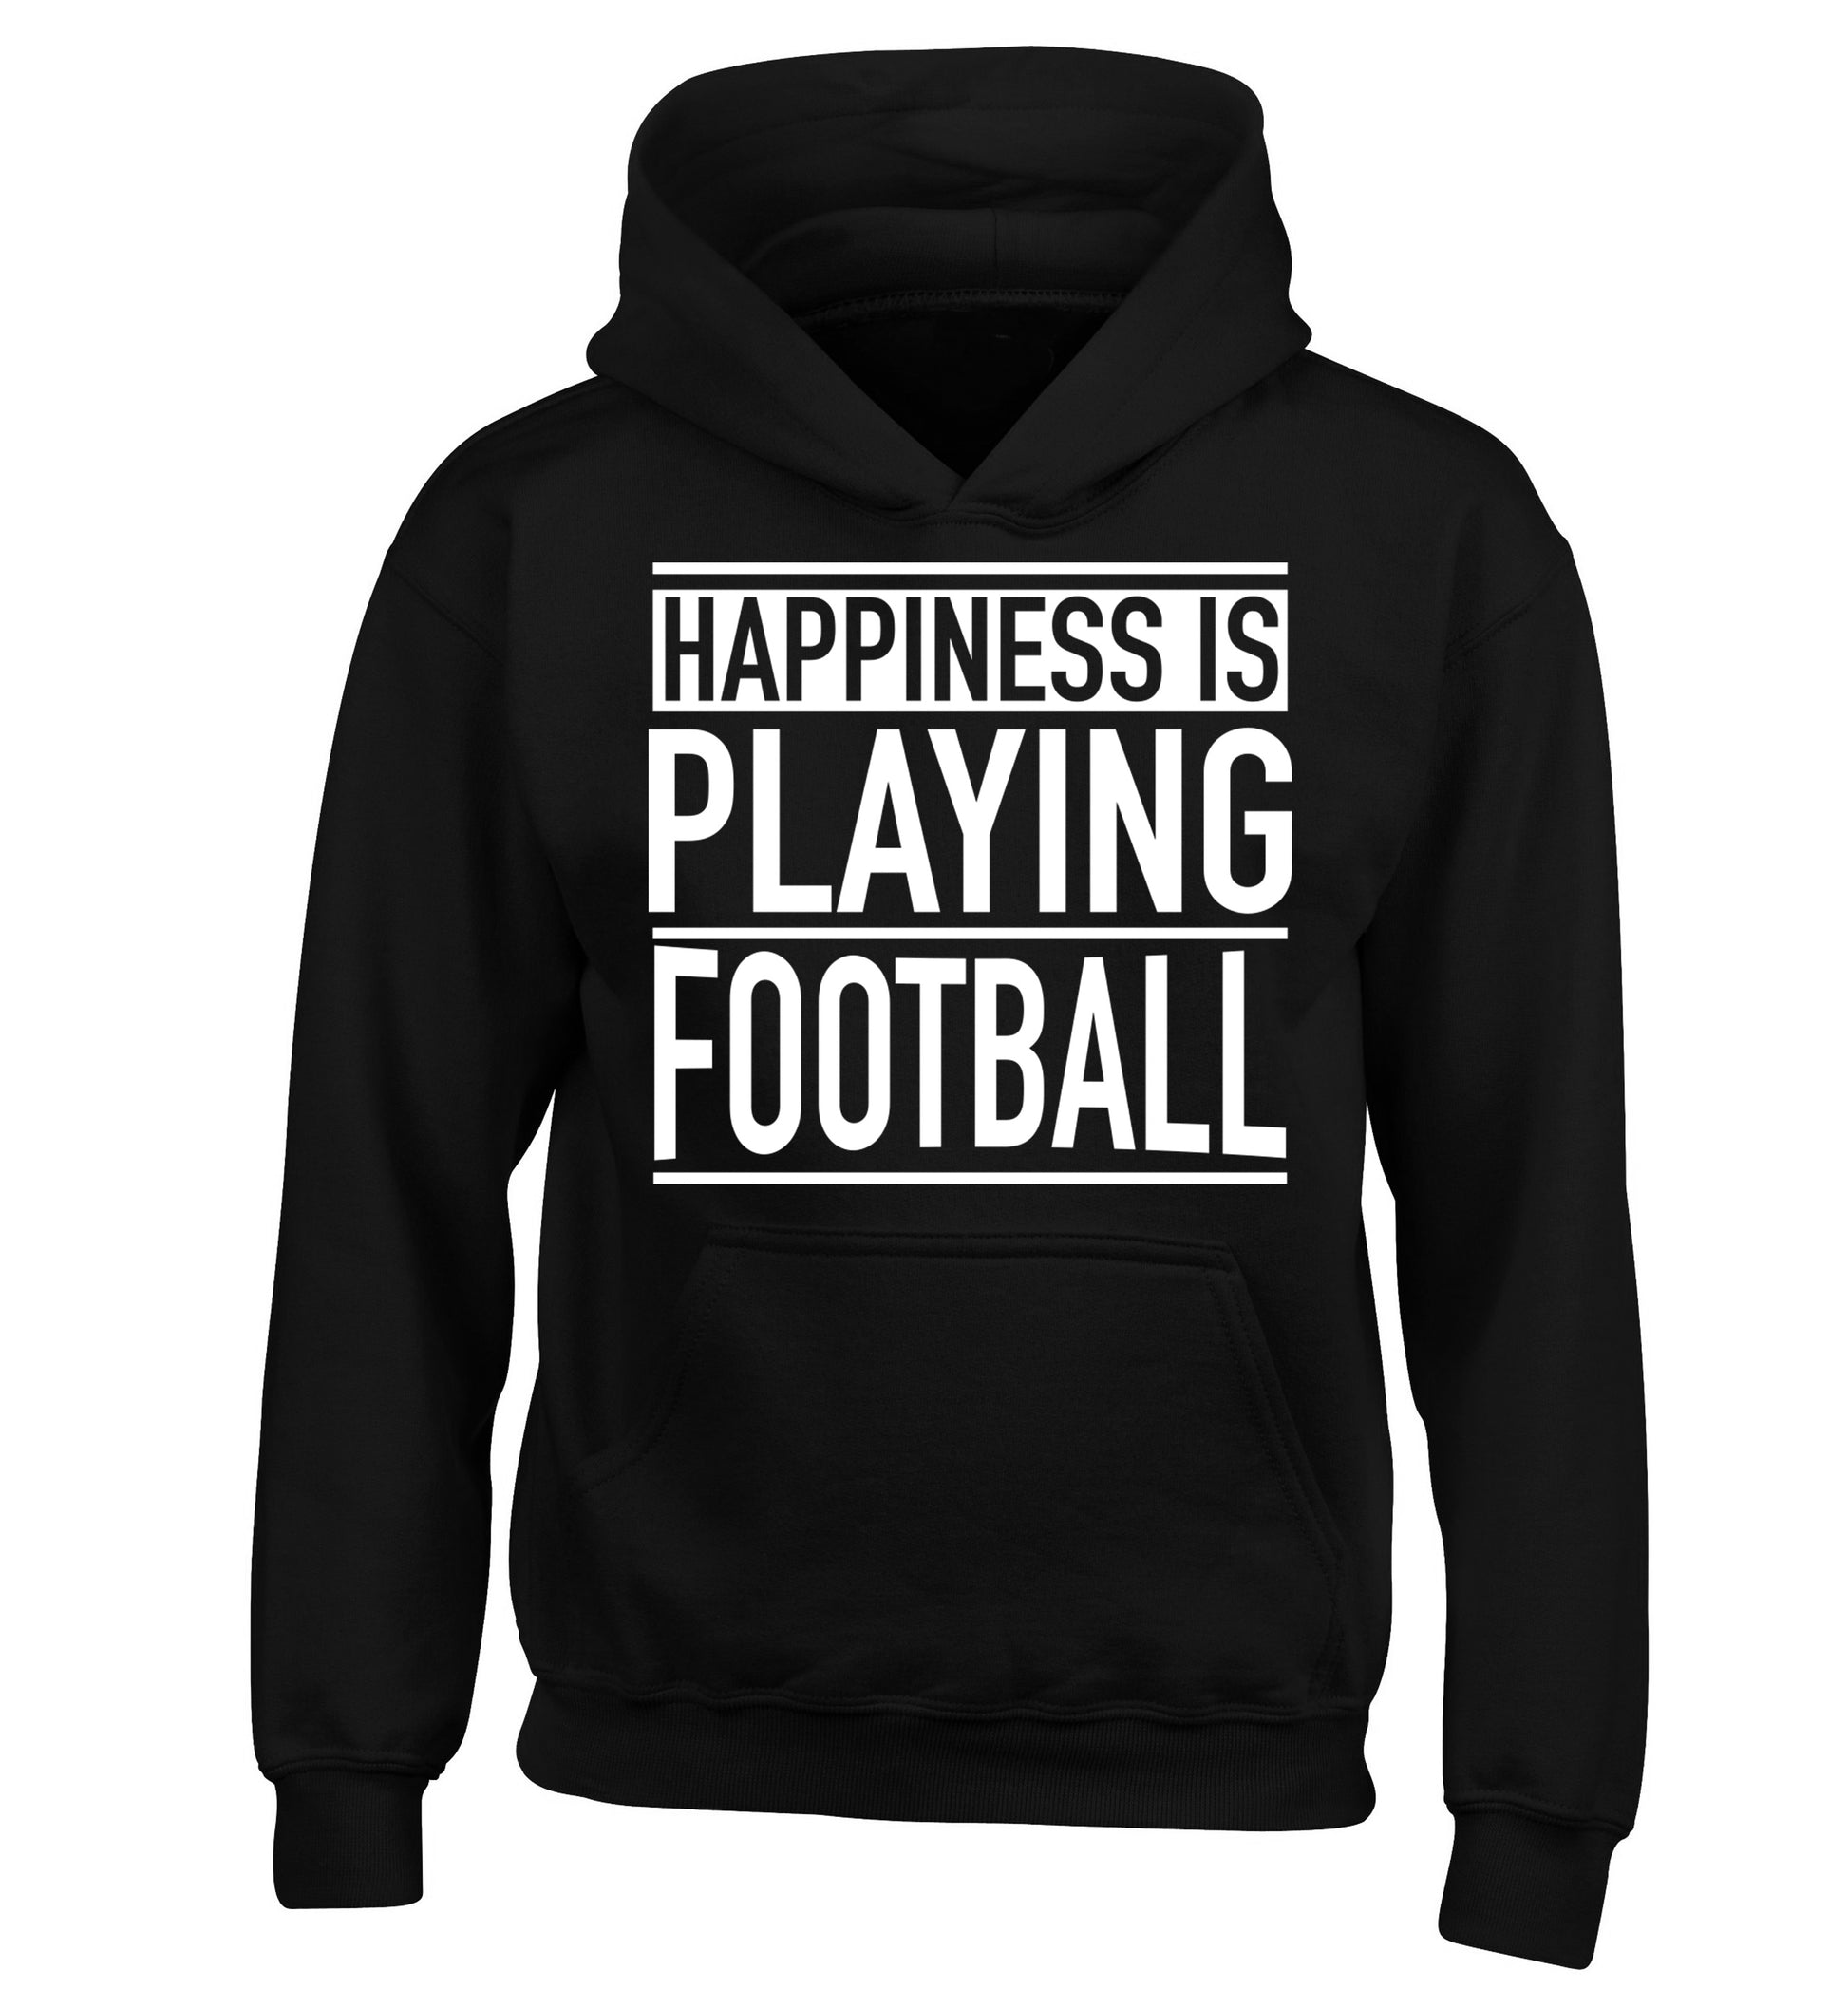 Happiness is playing football children's black hoodie 12-14 Years